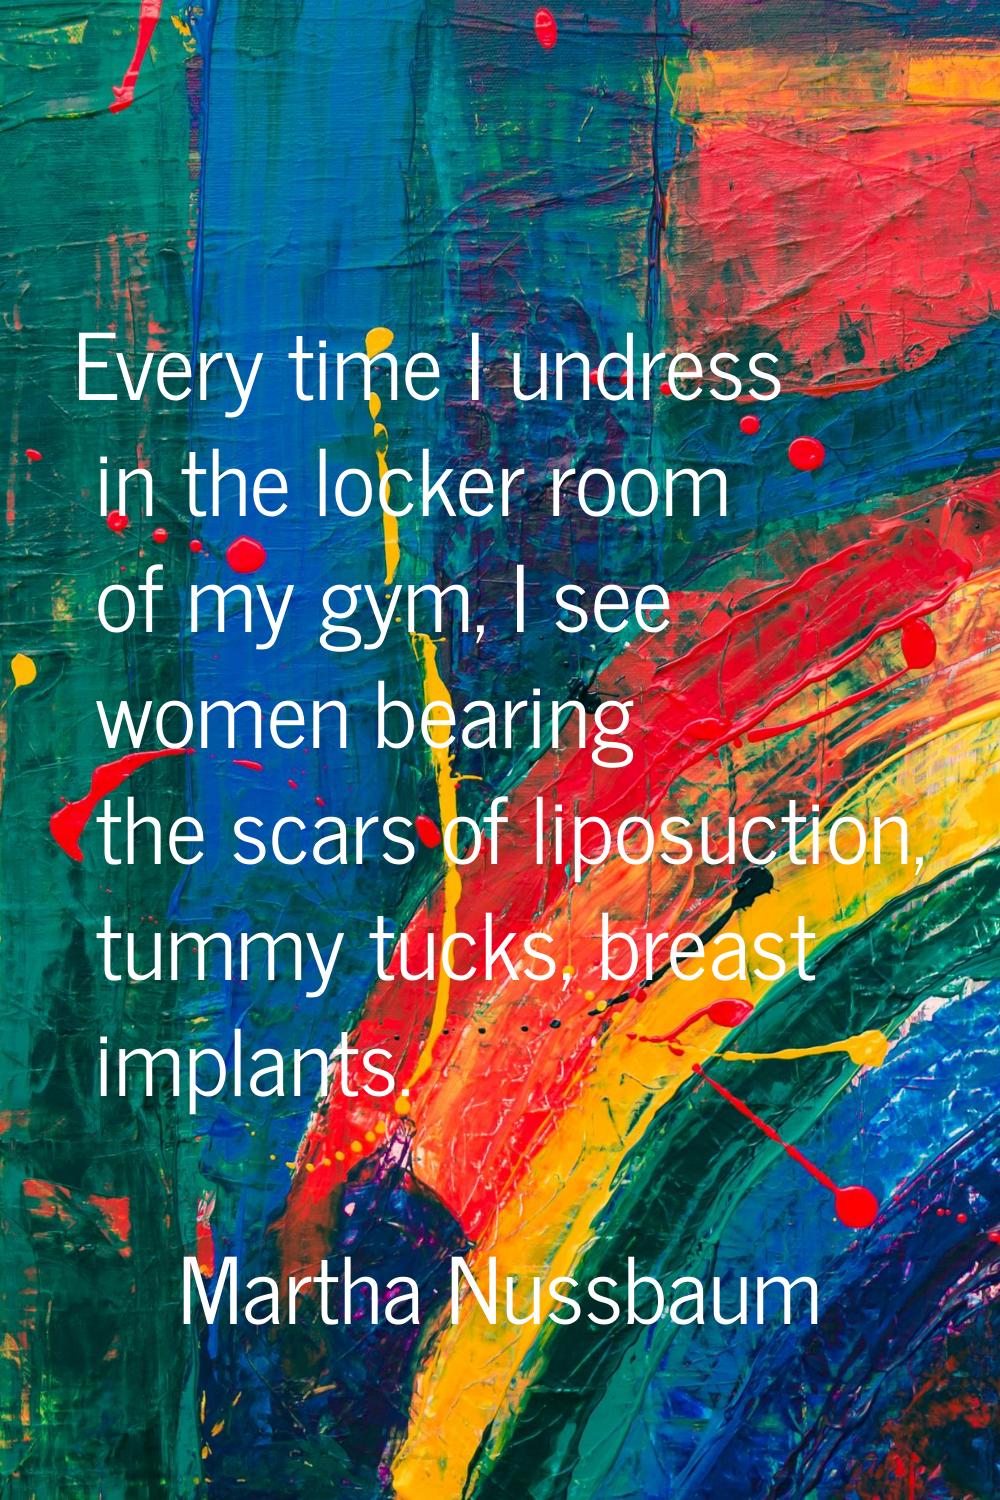 Every time I undress in the locker room of my gym, I see women bearing the scars of liposuction, tu